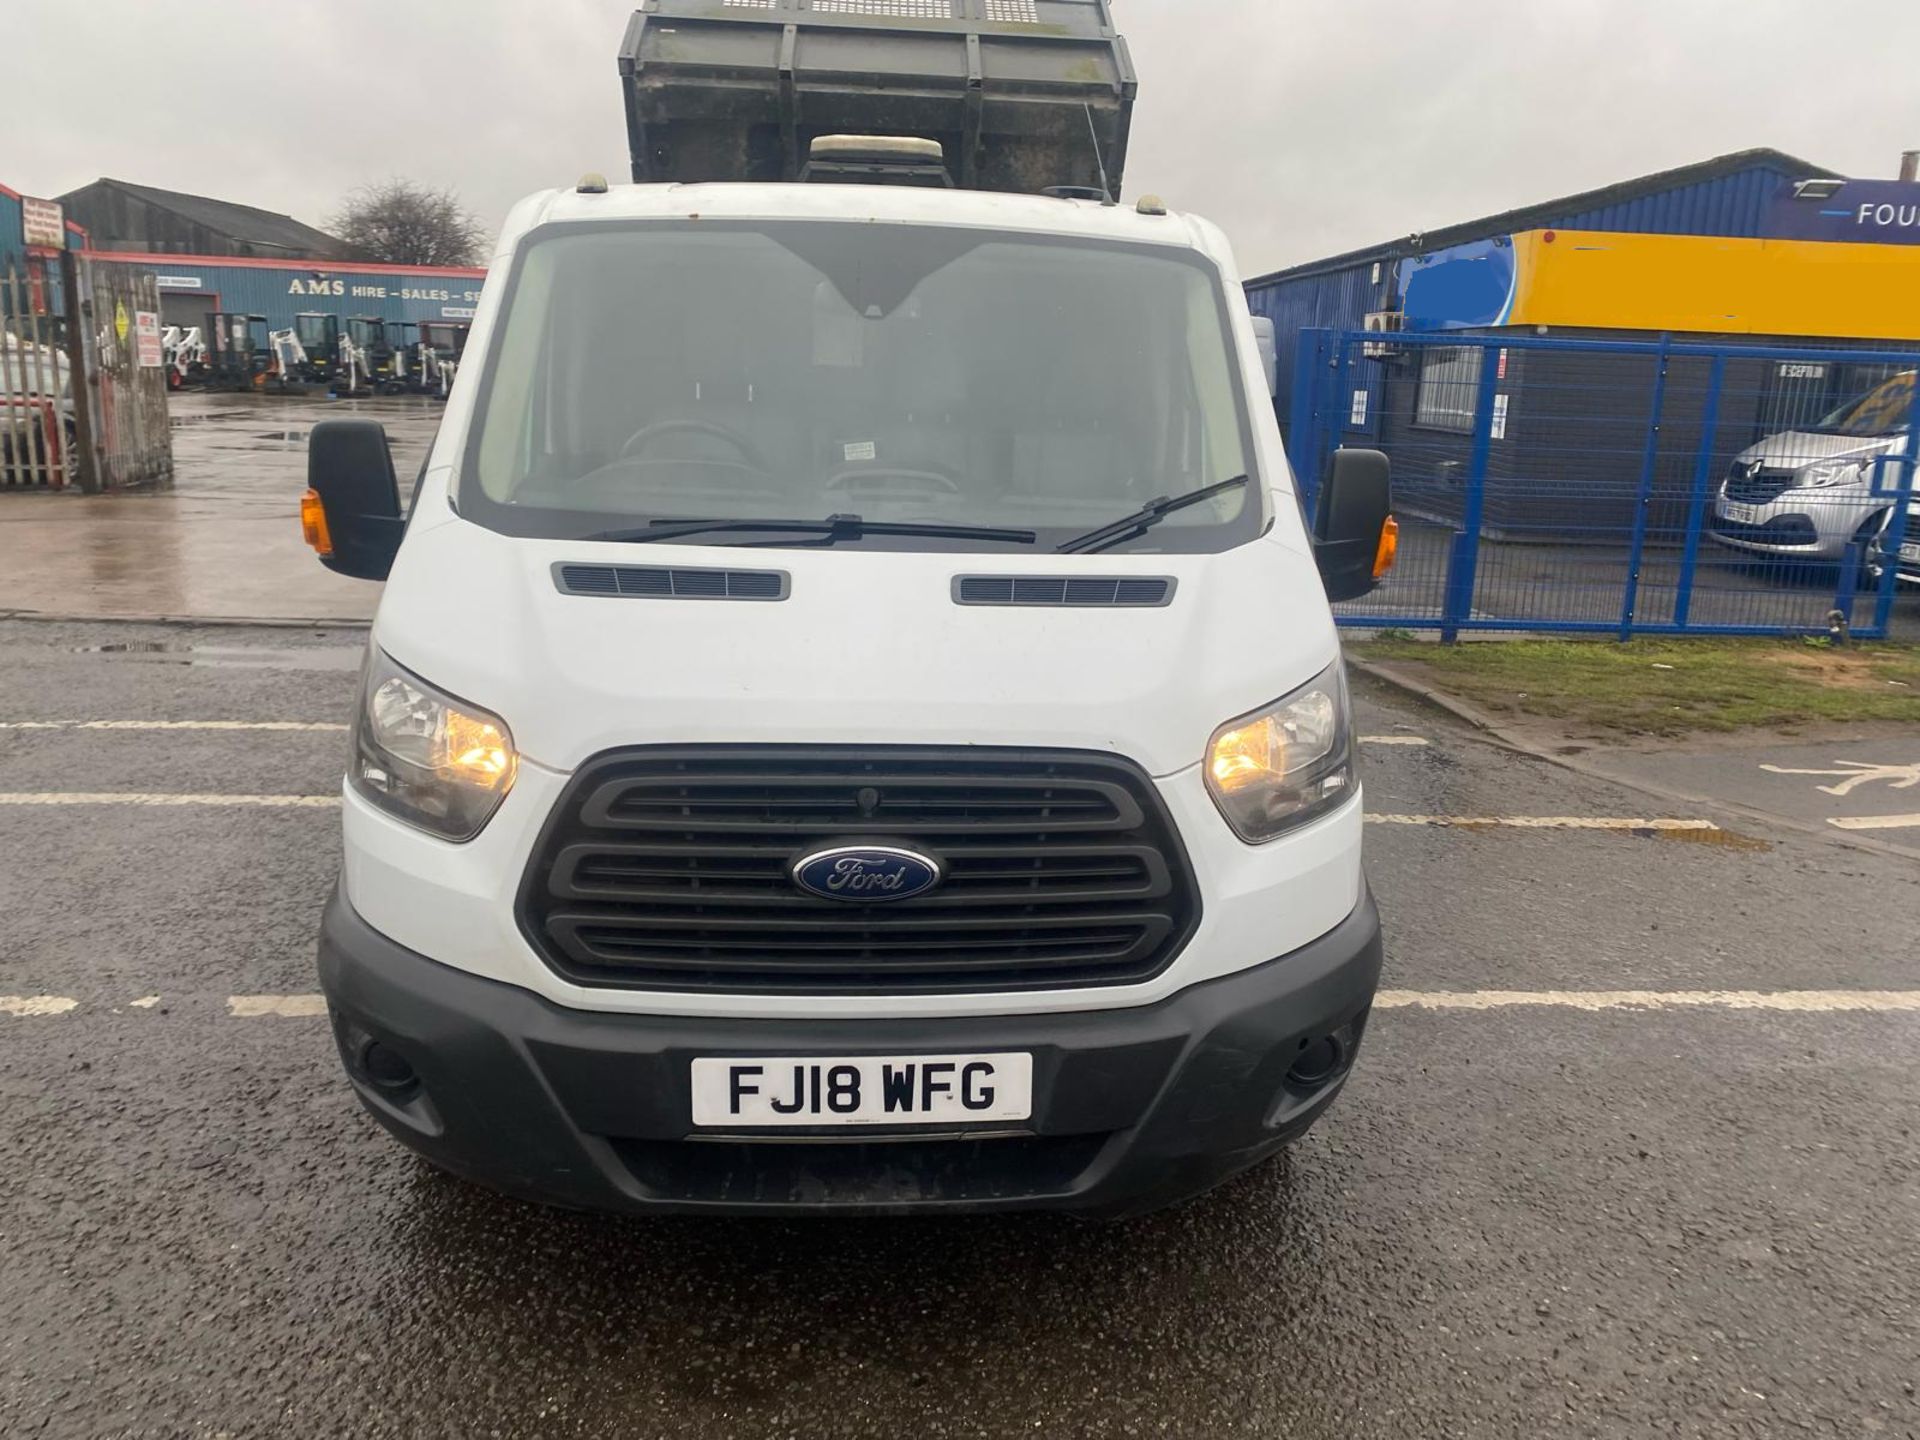 2018 18 FORD TRANSIT 470 TIPPER - 90K MILES - 4.7 TON GROSS - 3 SEATS - RARE TIPPER - TOWBAR. - Image 7 of 15